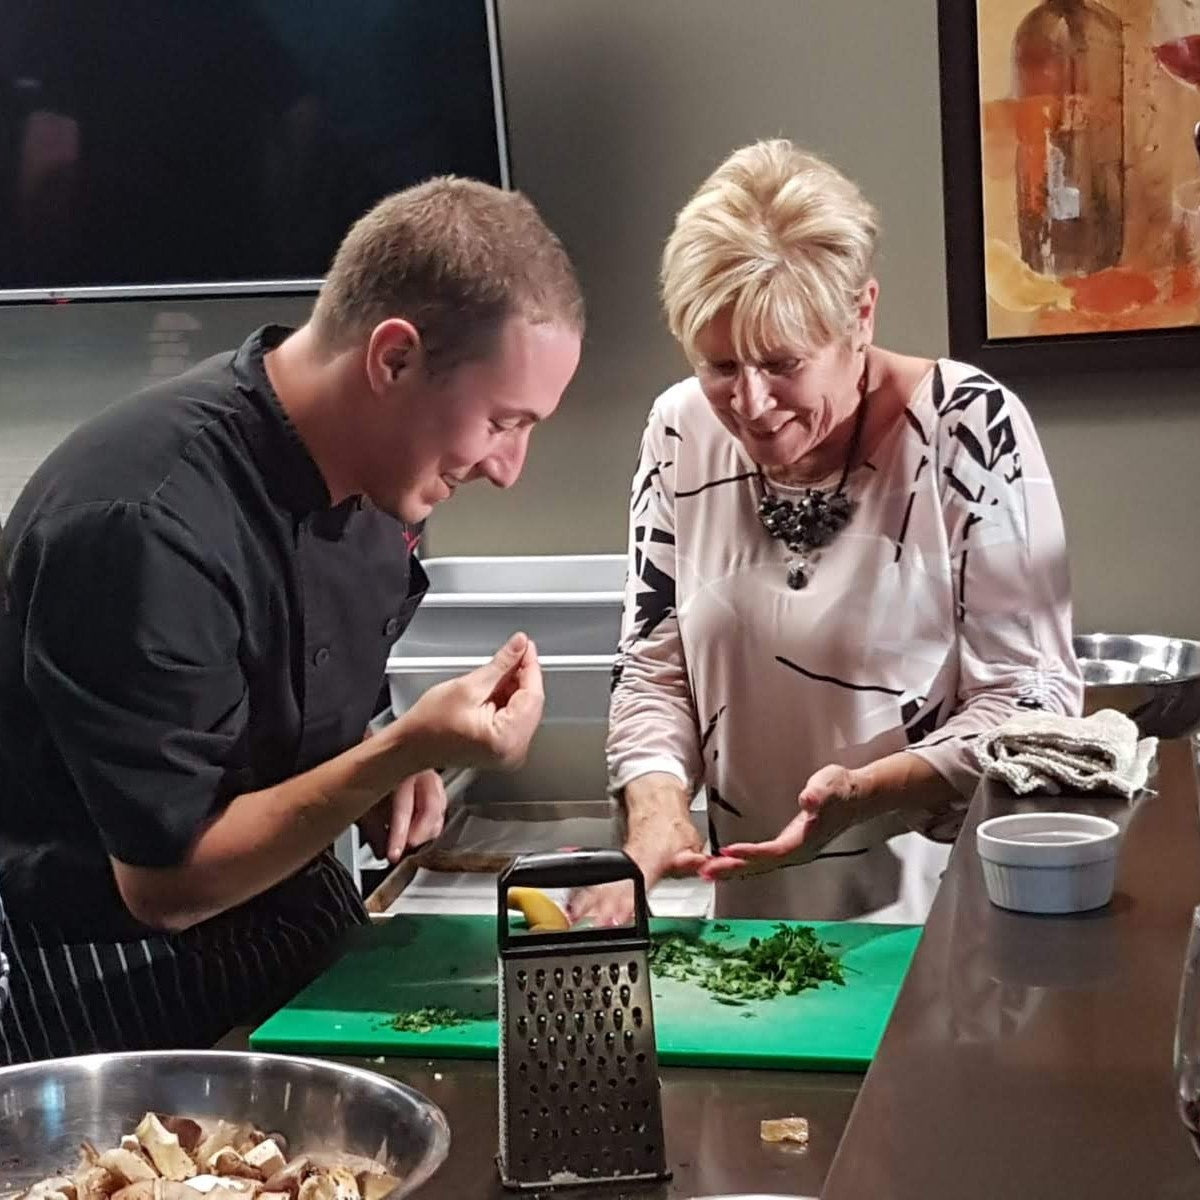 Midtown - Food Lover's 5-Course Cooking Class: A Night with Nonna (cost is per pair)